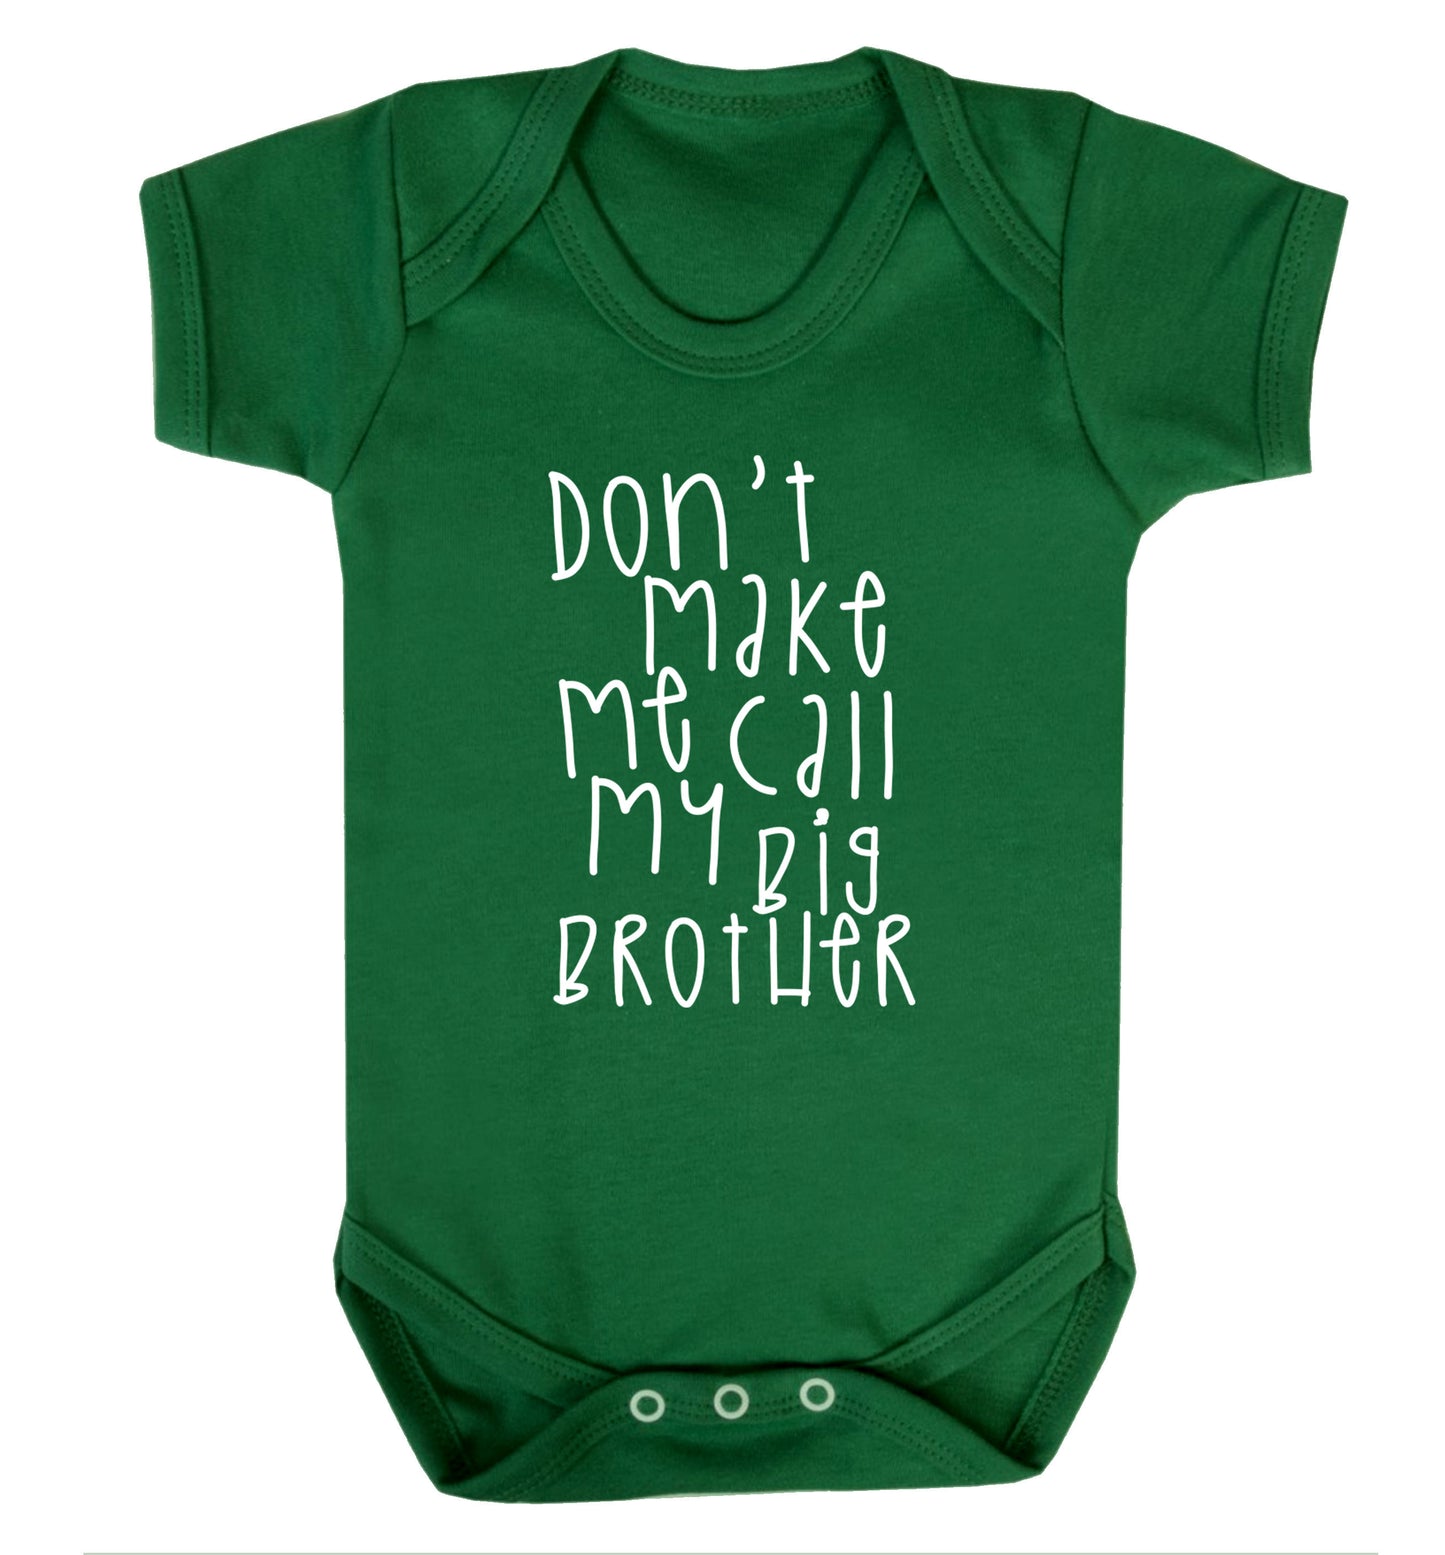 Don't make me call my big brother Baby Vest green 18-24 months